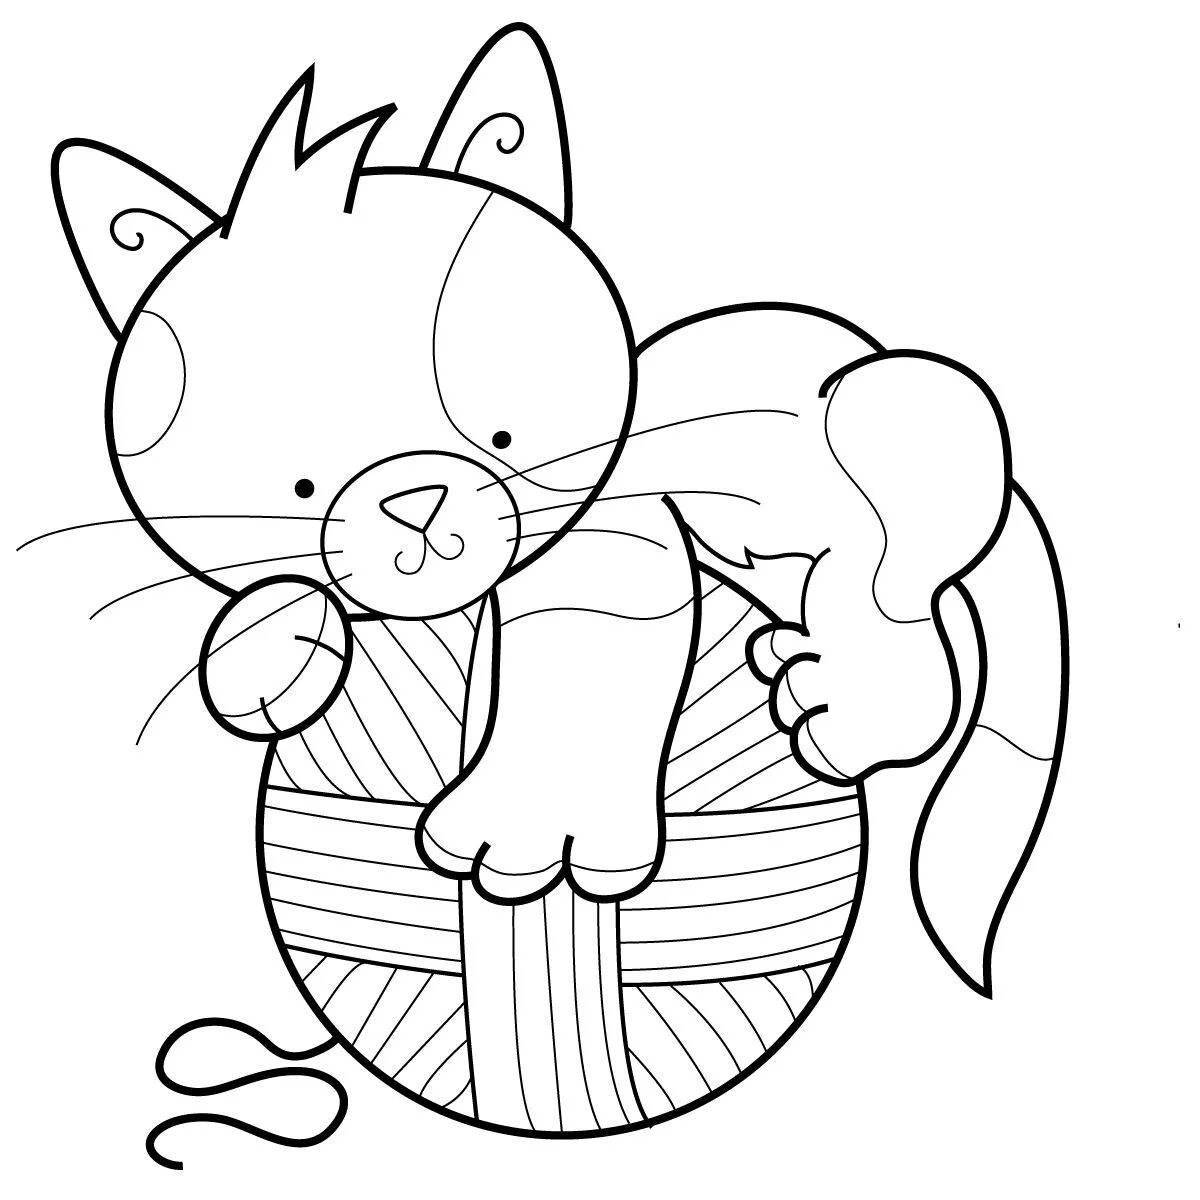 Coloring page funny cat with a ball